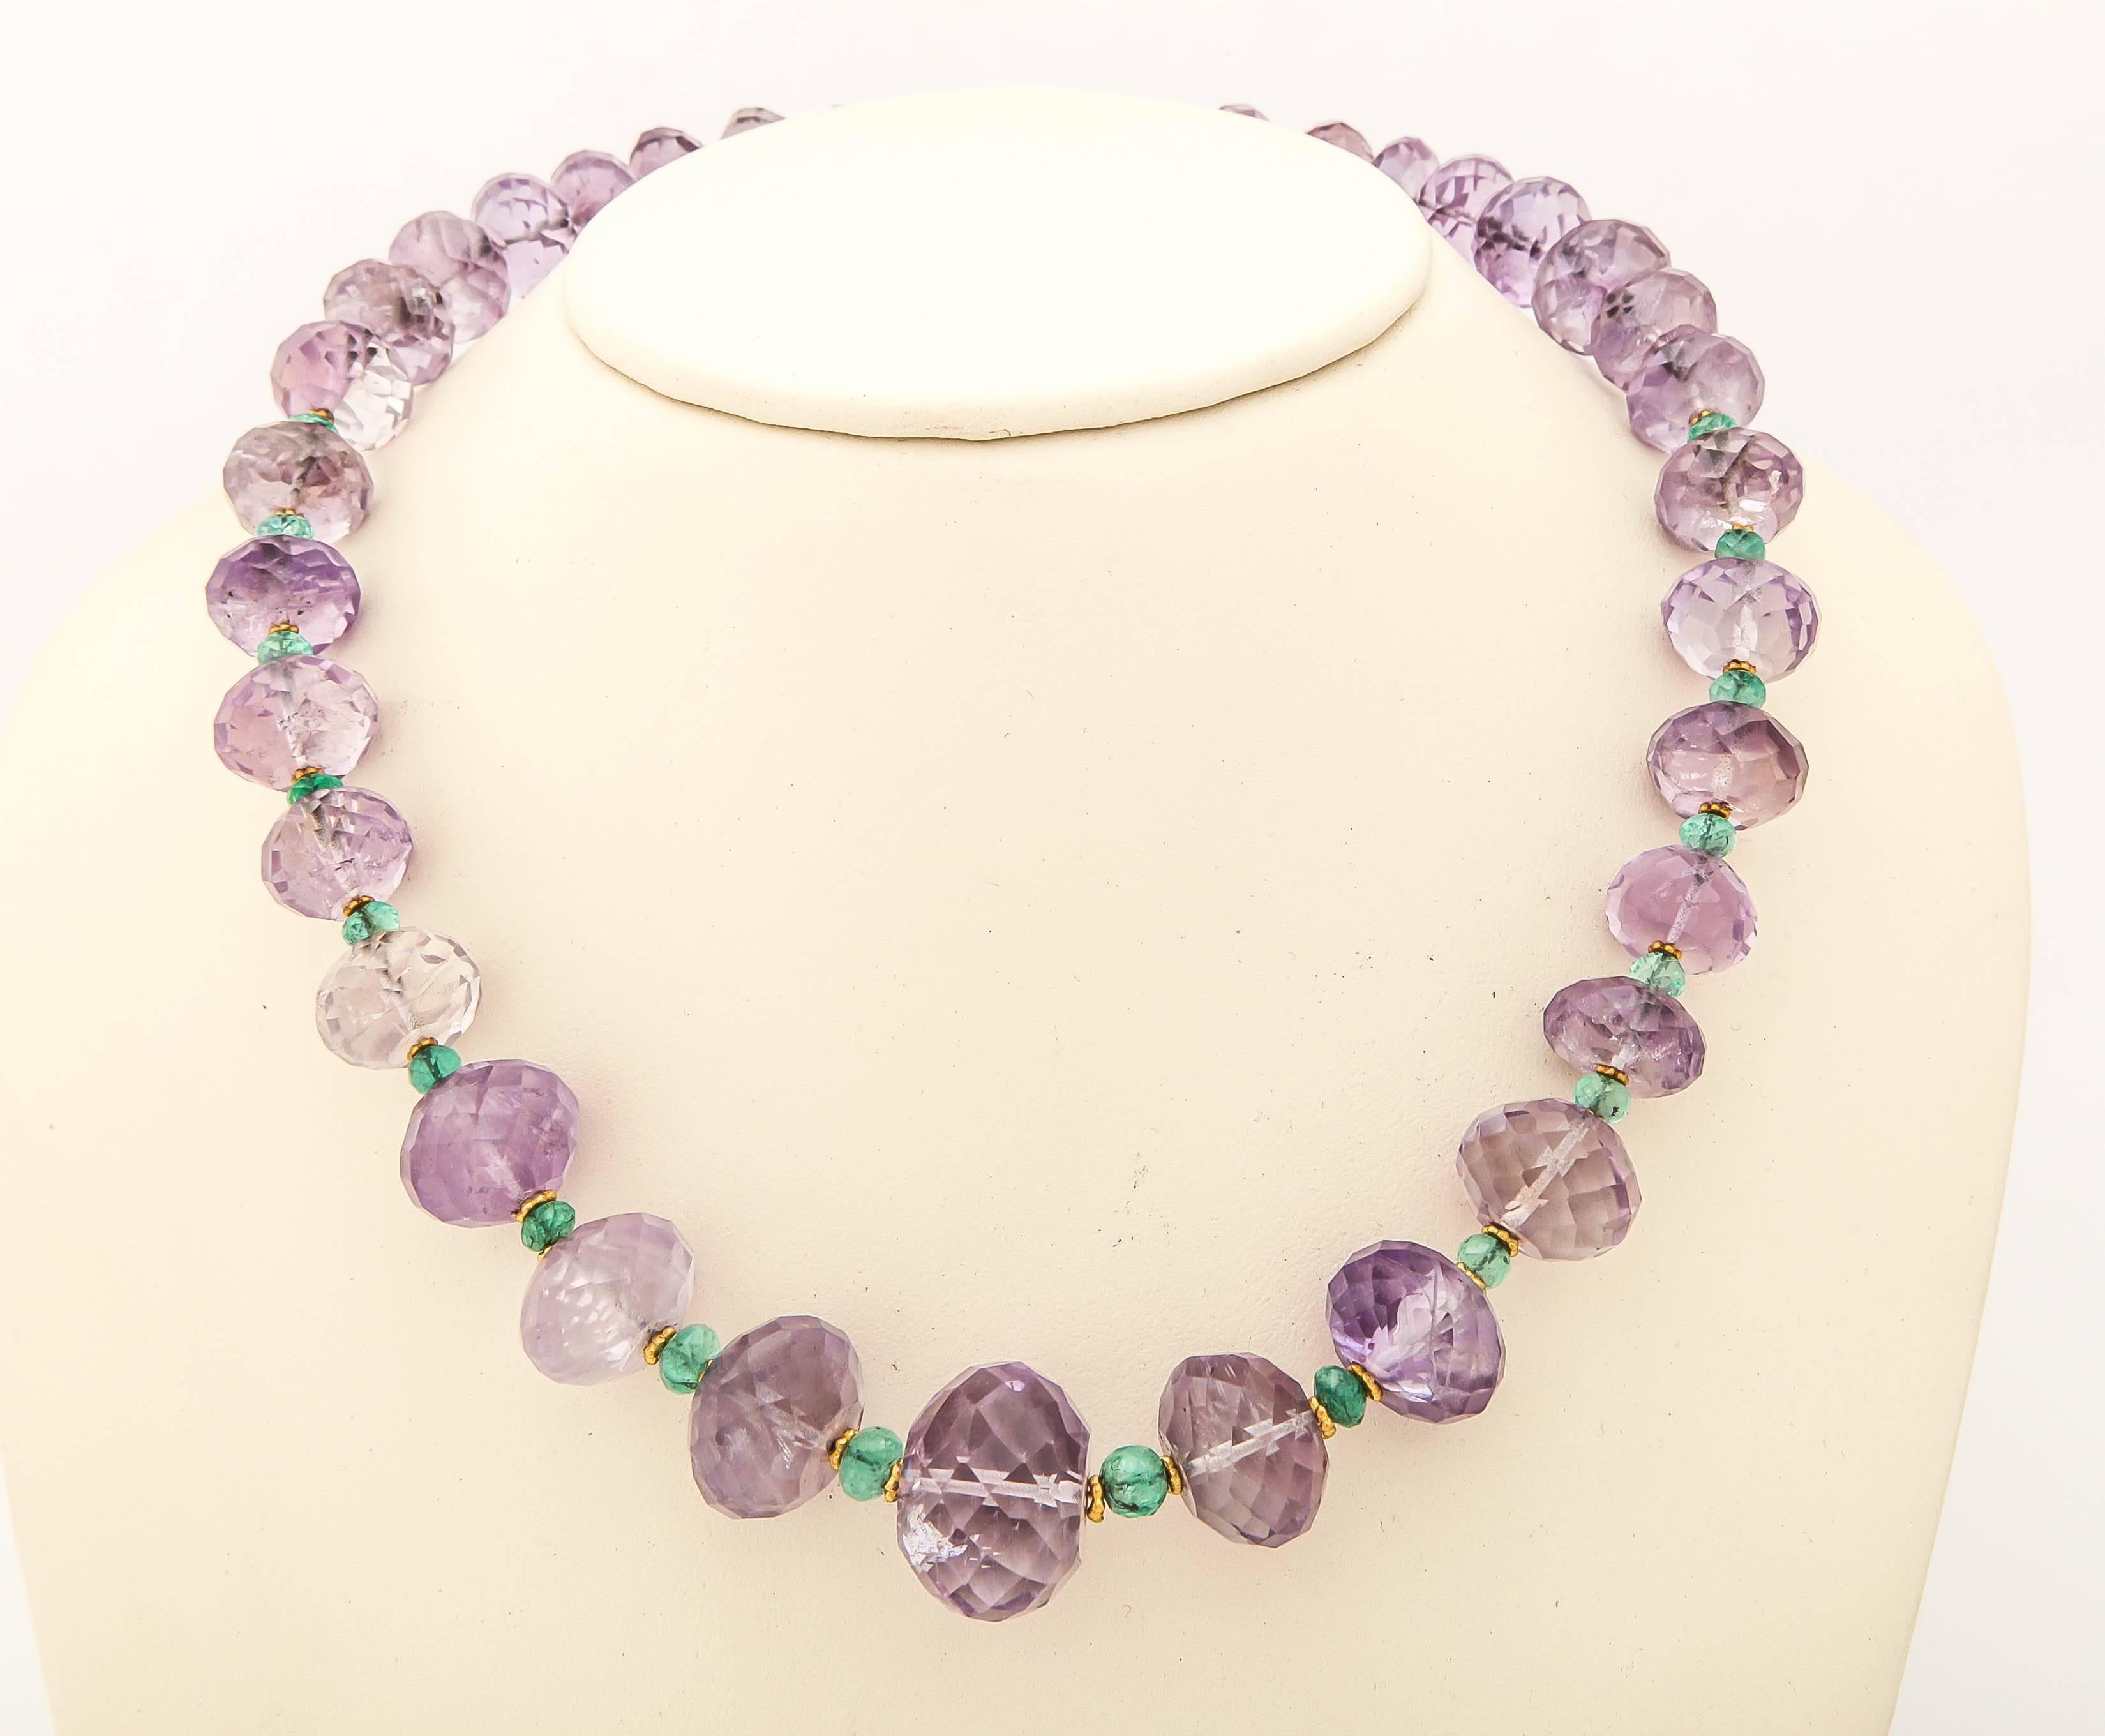 Large faceted light purple amethyst beads a strung with faceted emerald beads and 18 kt gold daisy beads in between, a classical and elegant combination.The easy to manage toggle clasp is also 18 kt.  The largest amethyst bead is approximately 1